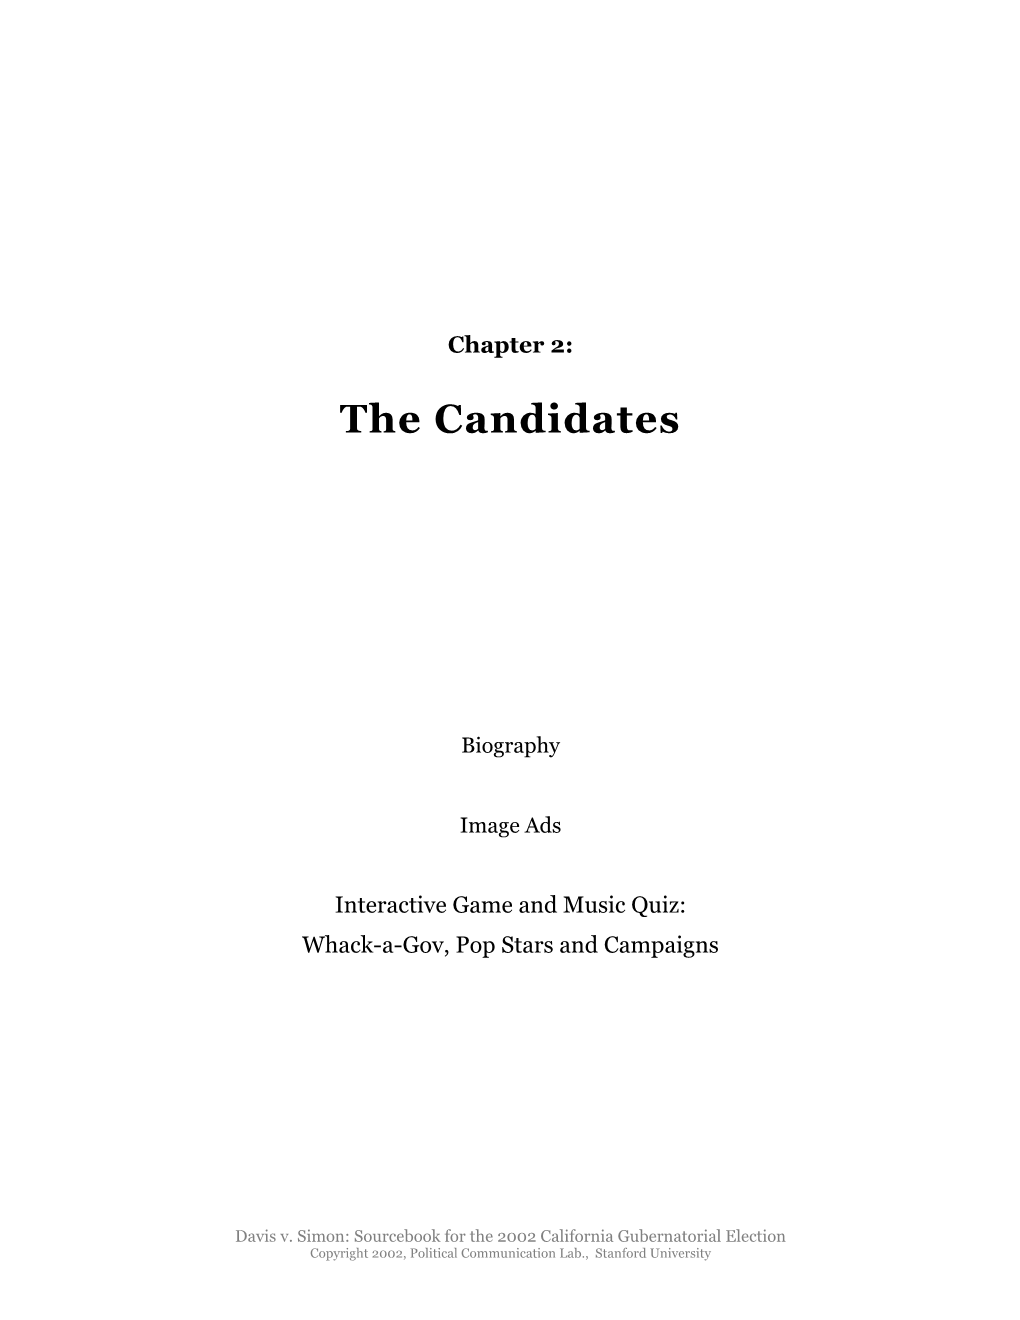 Chapter 2: the Candidates